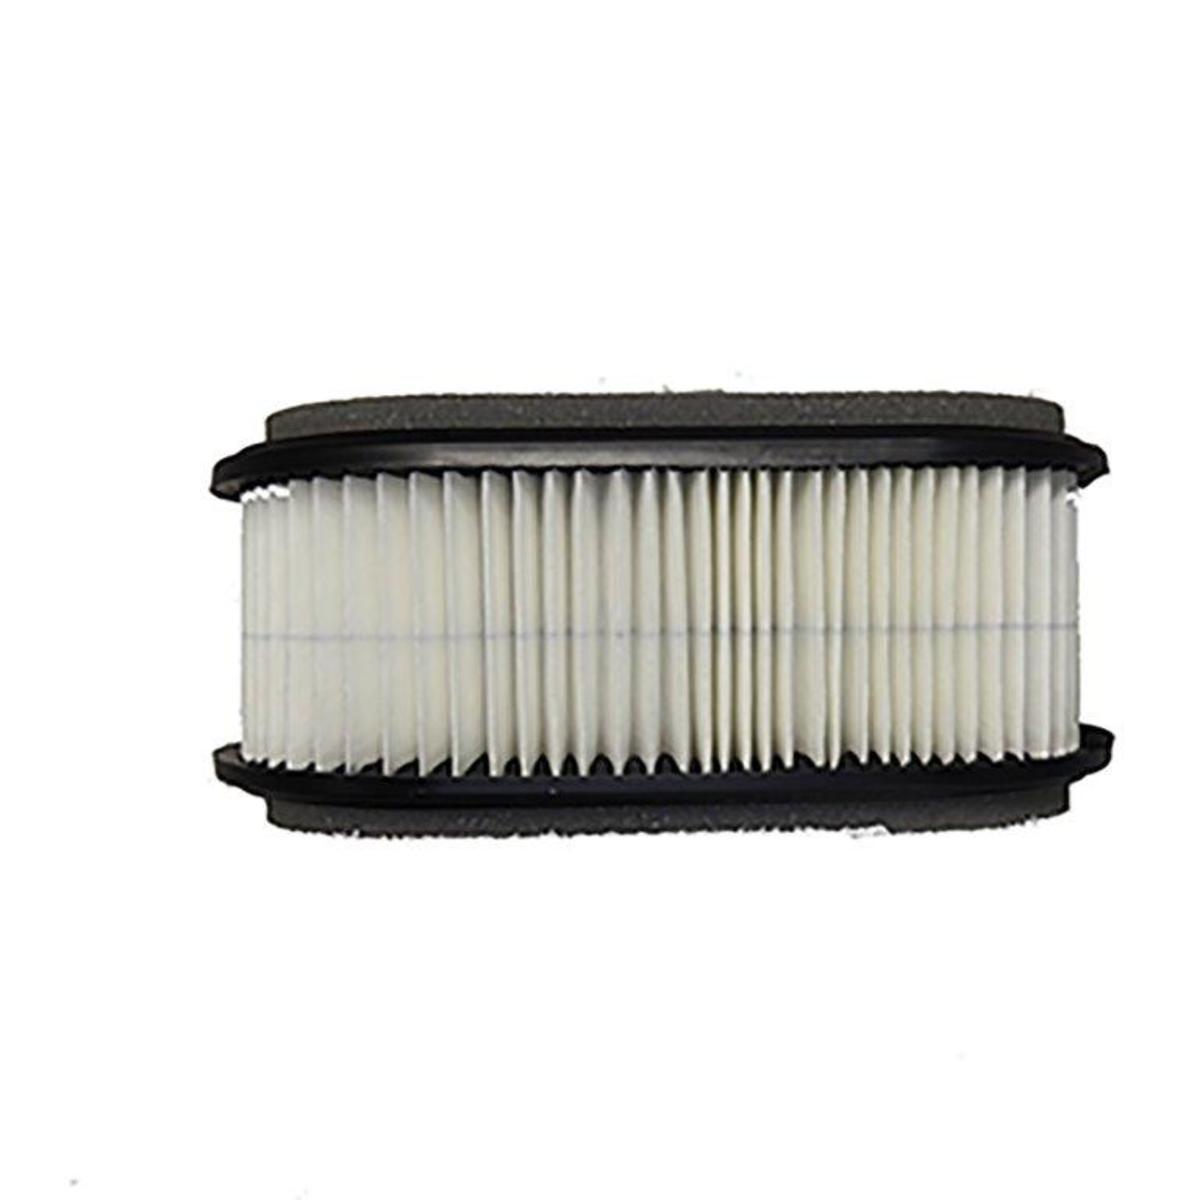 John Deere Air Filter Element For LX  Series Riding Lawn Mowers